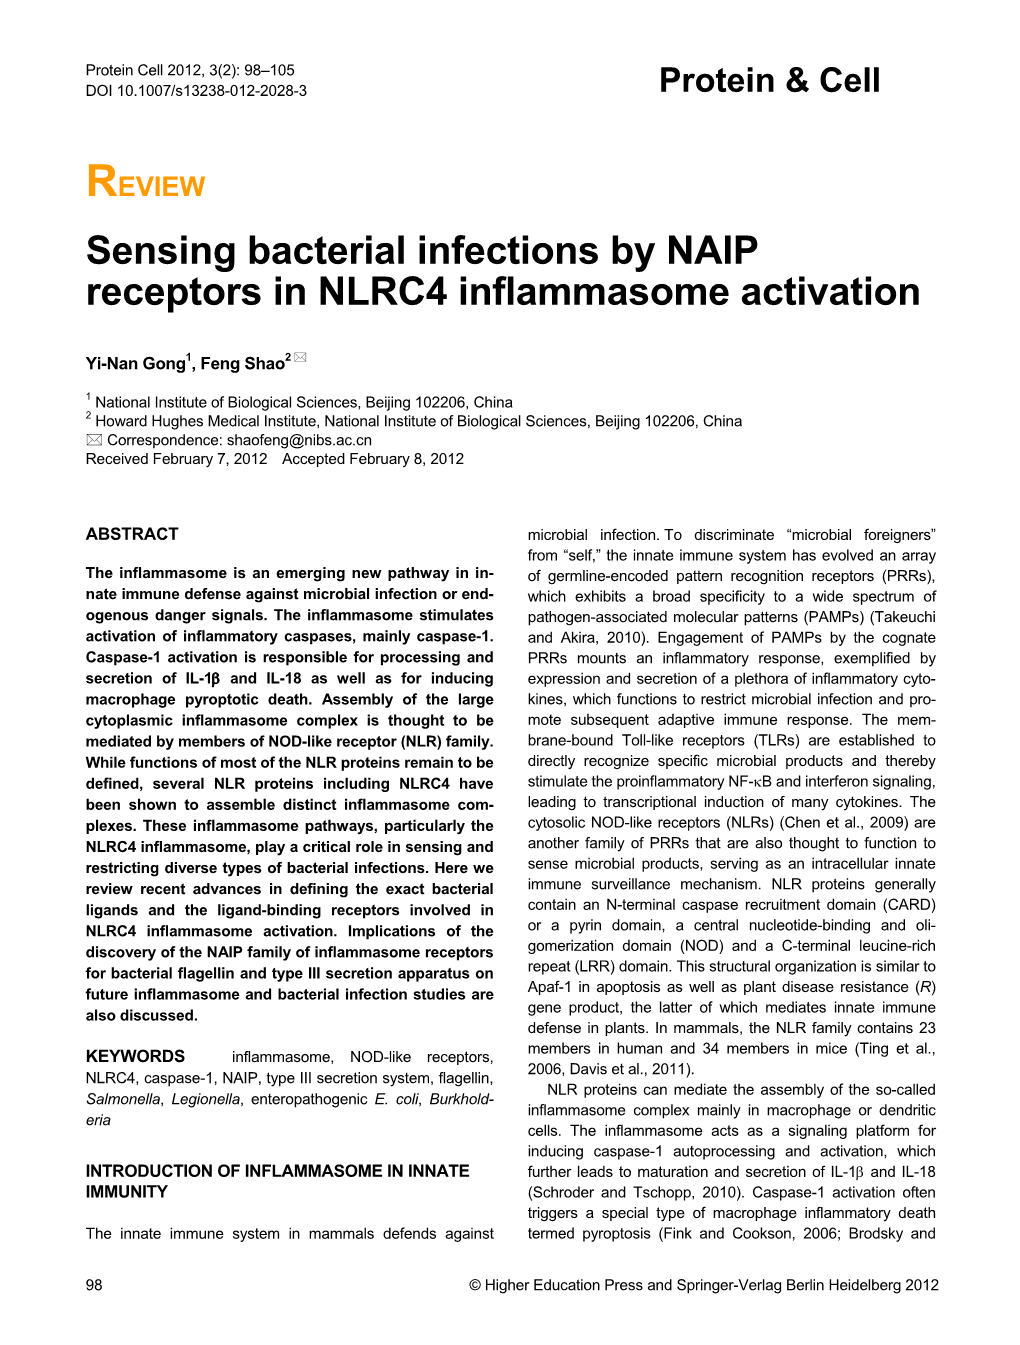 Sensing Bacterial Infections by NAIP Receptors in NLRC4 Inflammasome Activation